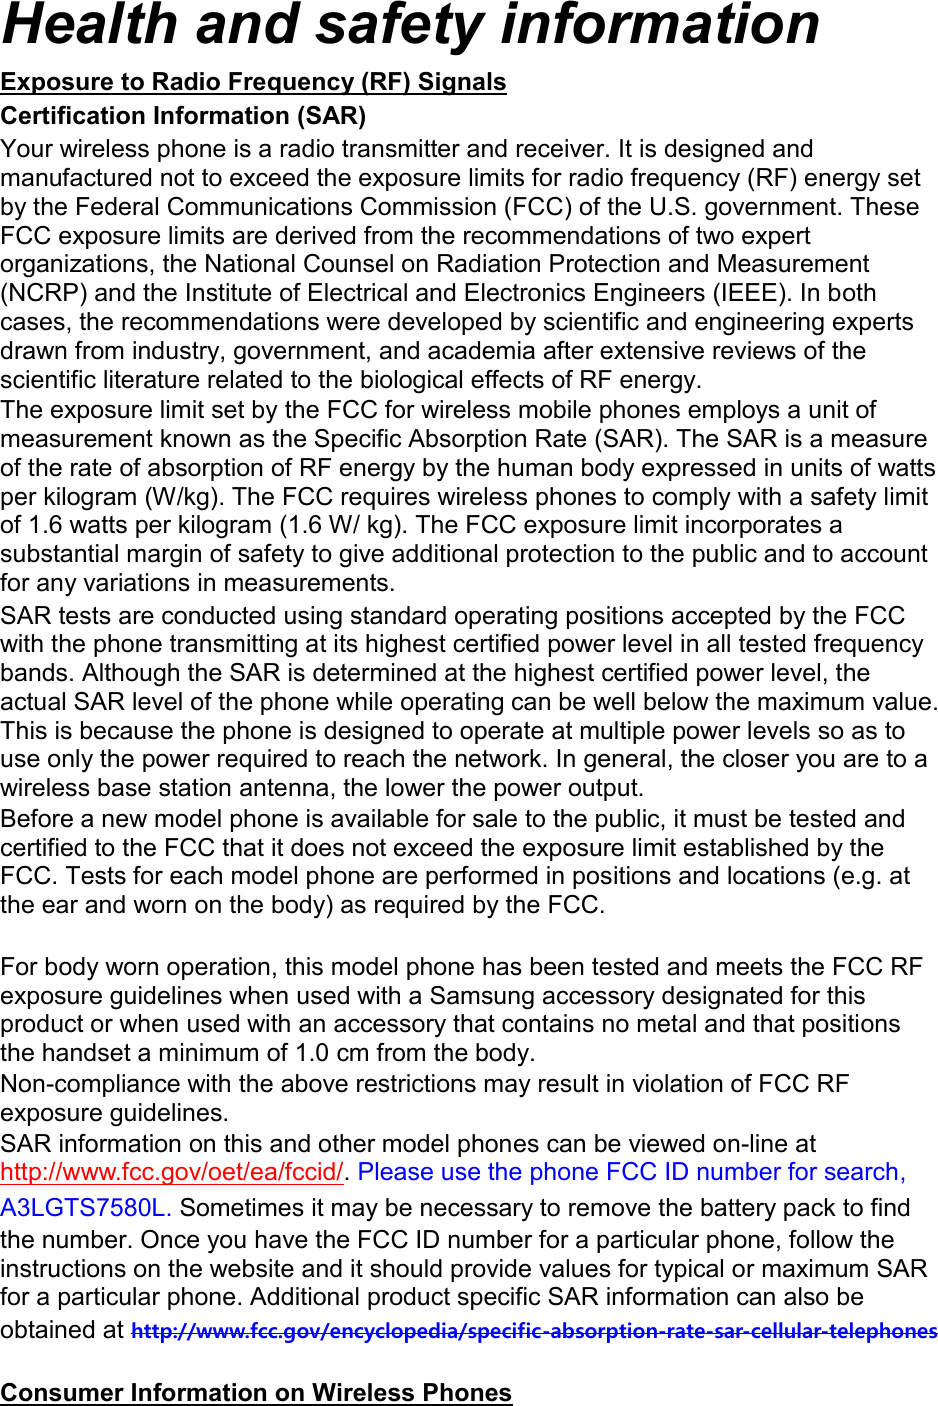 Health and safety information Exposure to Radio Frequency (RF) Signals Certification Information (SAR) Your wireless phone is a radio transmitter and receiver. It is designed and manufactured not to exceed the exposure limits for radio frequency (RF) energy set by the Federal Communications Commission (FCC) of the U.S. government. These FCC exposure limits are derived from the recommendations of two expert organizations, the National Counsel on Radiation Protection and Measurement (NCRP) and the Institute of Electrical and Electronics Engineers (IEEE). In both cases, the recommendations were developed by scientific and engineering experts drawn from industry, government, and academia after extensive reviews of the scientific literature related to the biological effects of RF energy. The exposure limit set by the FCC for wireless mobile phones employs a unit of measurement known as the Specific Absorption Rate (SAR). The SAR is a measure of the rate of absorption of RF energy by the human body expressed in units of watts per kilogram (W/kg). The FCC requires wireless phones to comply with a safety limit of 1.6 watts per kilogram (1.6 W/ kg). The FCC exposure limit incorporates a substantial margin of safety to give additional protection to the public and to account for any variations in measurements. SAR tests are conducted using standard operating positions accepted by the FCC with the phone transmitting at its highest certified power level in all tested frequency bands. Although the SAR is determined at the highest certified power level, the actual SAR level of the phone while operating can be well below the maximum value. This is because the phone is designed to operate at multiple power levels so as to use only the power required to reach the network. In general, the closer you are to a wireless base station antenna, the lower the power output. Before a new model phone is available for sale to the public, it must be tested and certified to the FCC that it does not exceed the exposure limit established by the FCC. Tests for each model phone are performed in positions and locations (e.g. at the ear and worn on the body) as required by the FCC.      For body worn operation, this model phone has been tested and meets the FCC RF exposure guidelines when used with a Samsung accessory designated for this product or when used with an accessory that contains no metal and that positions the handset a minimum of 1.0 cm from the body.   Non-compliance with the above restrictions may result in violation of FCC RF exposure guidelines. SAR information on this and other model phones can be viewed on-line at http://www.fcc.gov/oet/ea/fccid/. Please use the phone FCC ID number for search, A3LGTS7580L. Sometimes it may be necessary to remove the battery pack to find the number. Once you have the FCC ID number for a particular phone, follow the instructions on the website and it should provide values for typical or maximum SAR for a particular phone. Additional product specific SAR information can also be obtained at http://www.fcc.gov/encyclopedia/specific-absorption-rate-sar-cellular-telephones  Consumer Information on Wireless Phones 